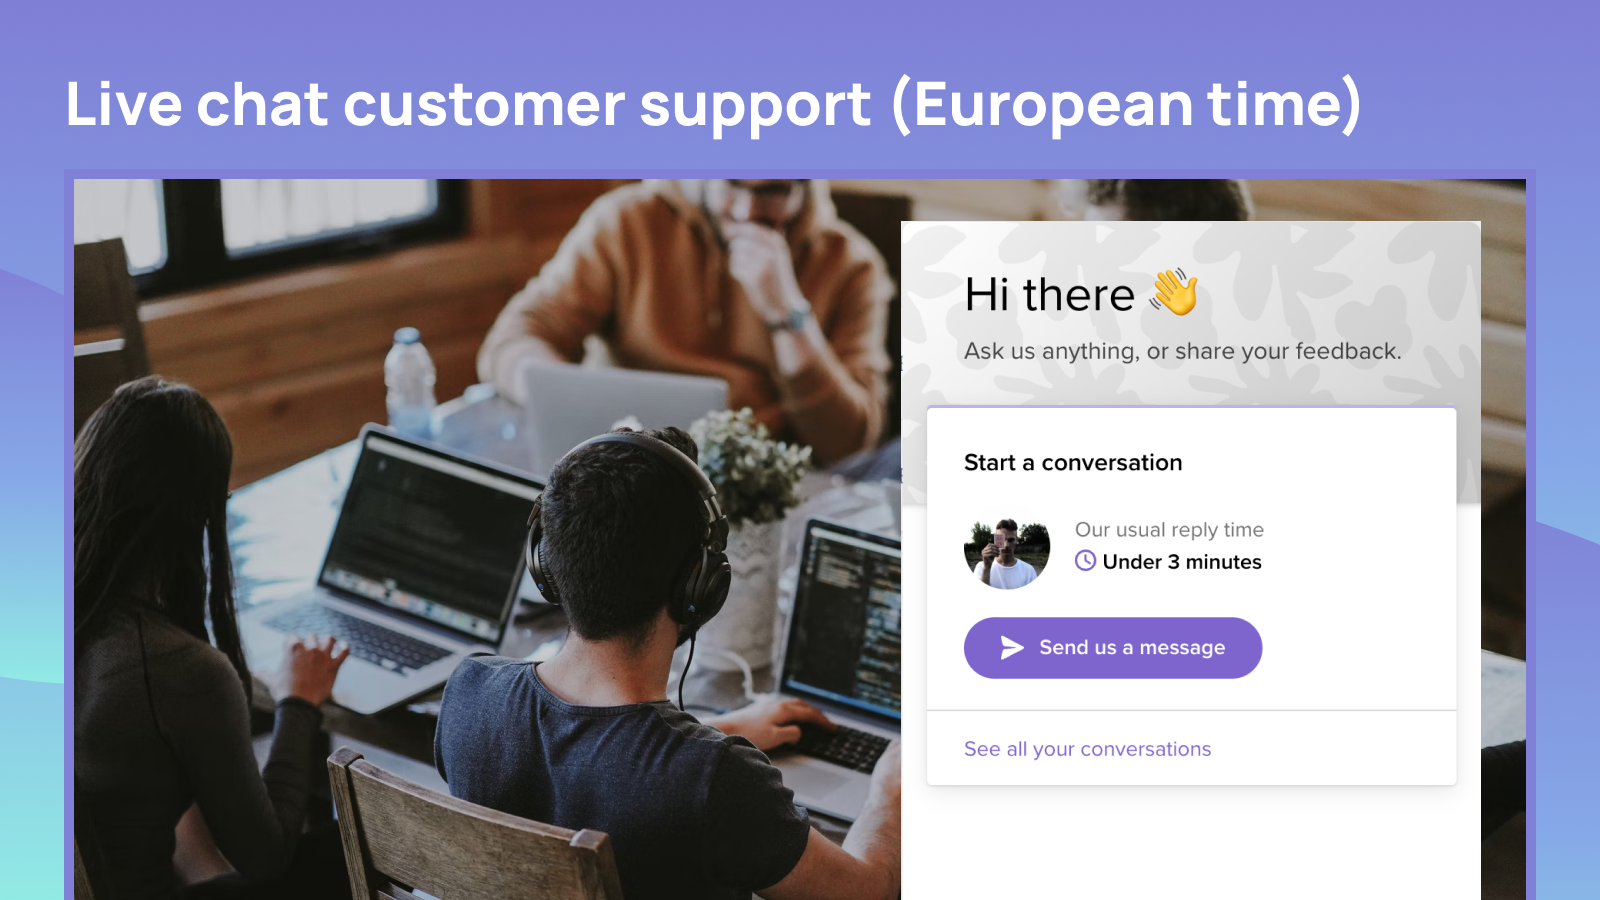 Live chat customer support (European time)